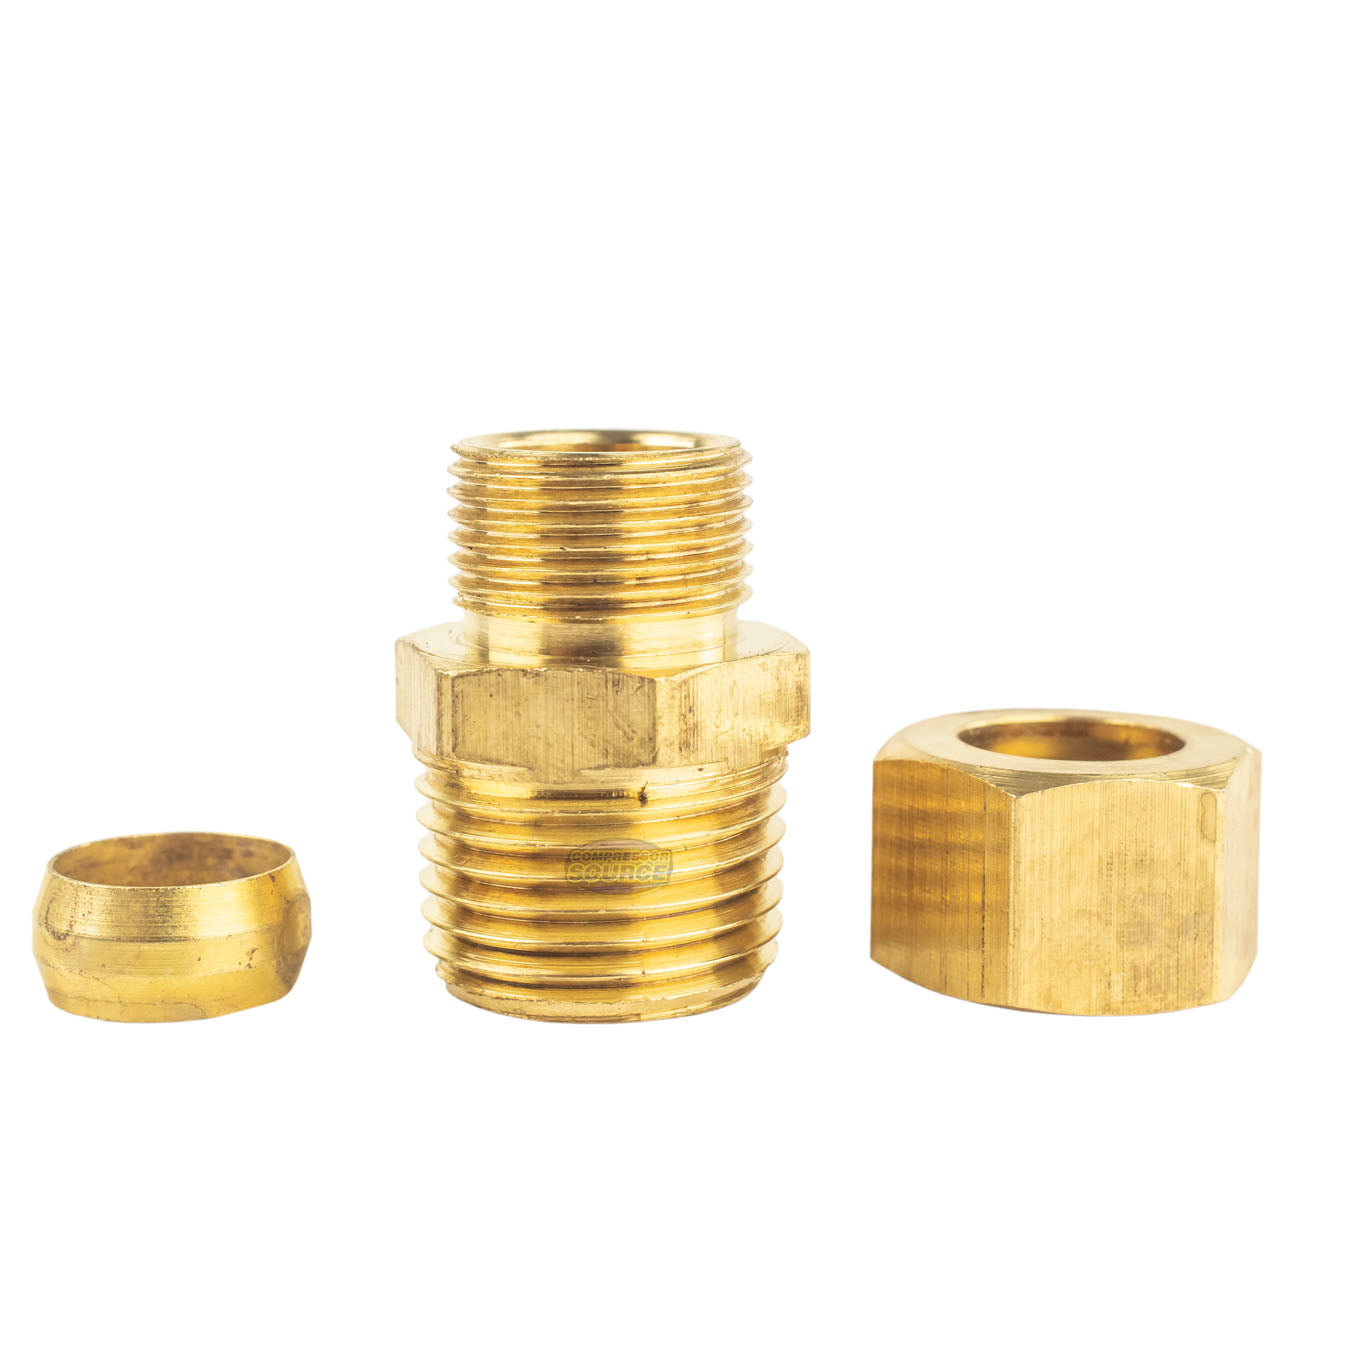 1/2" OD x 1/2" Male NPT Connector Brass Compression Fitting for 1/2" OD Tube